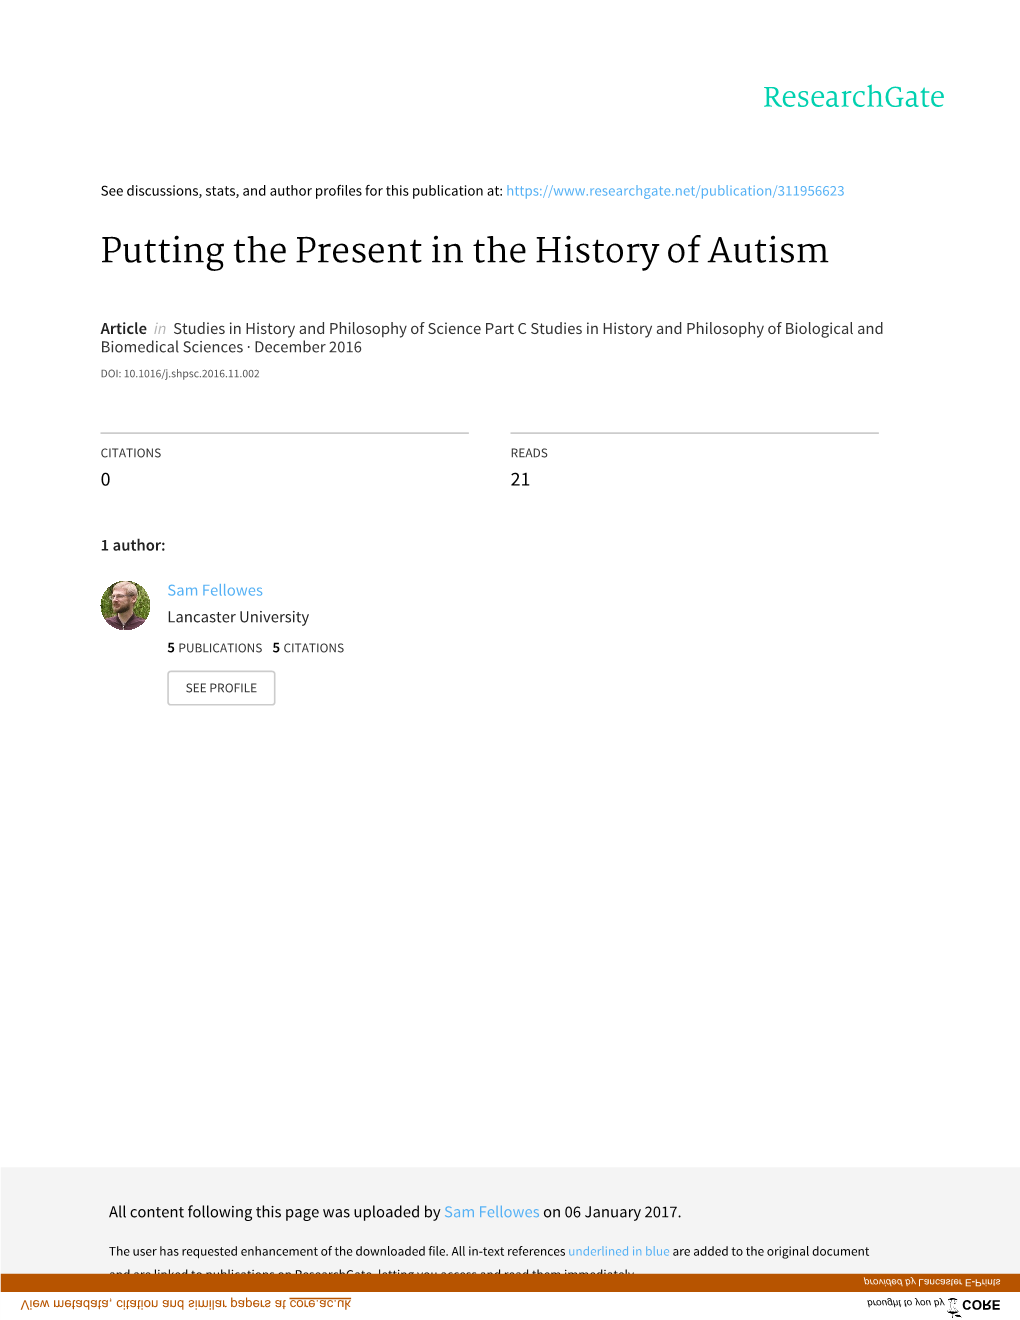 Putting the Present in the History of Autism